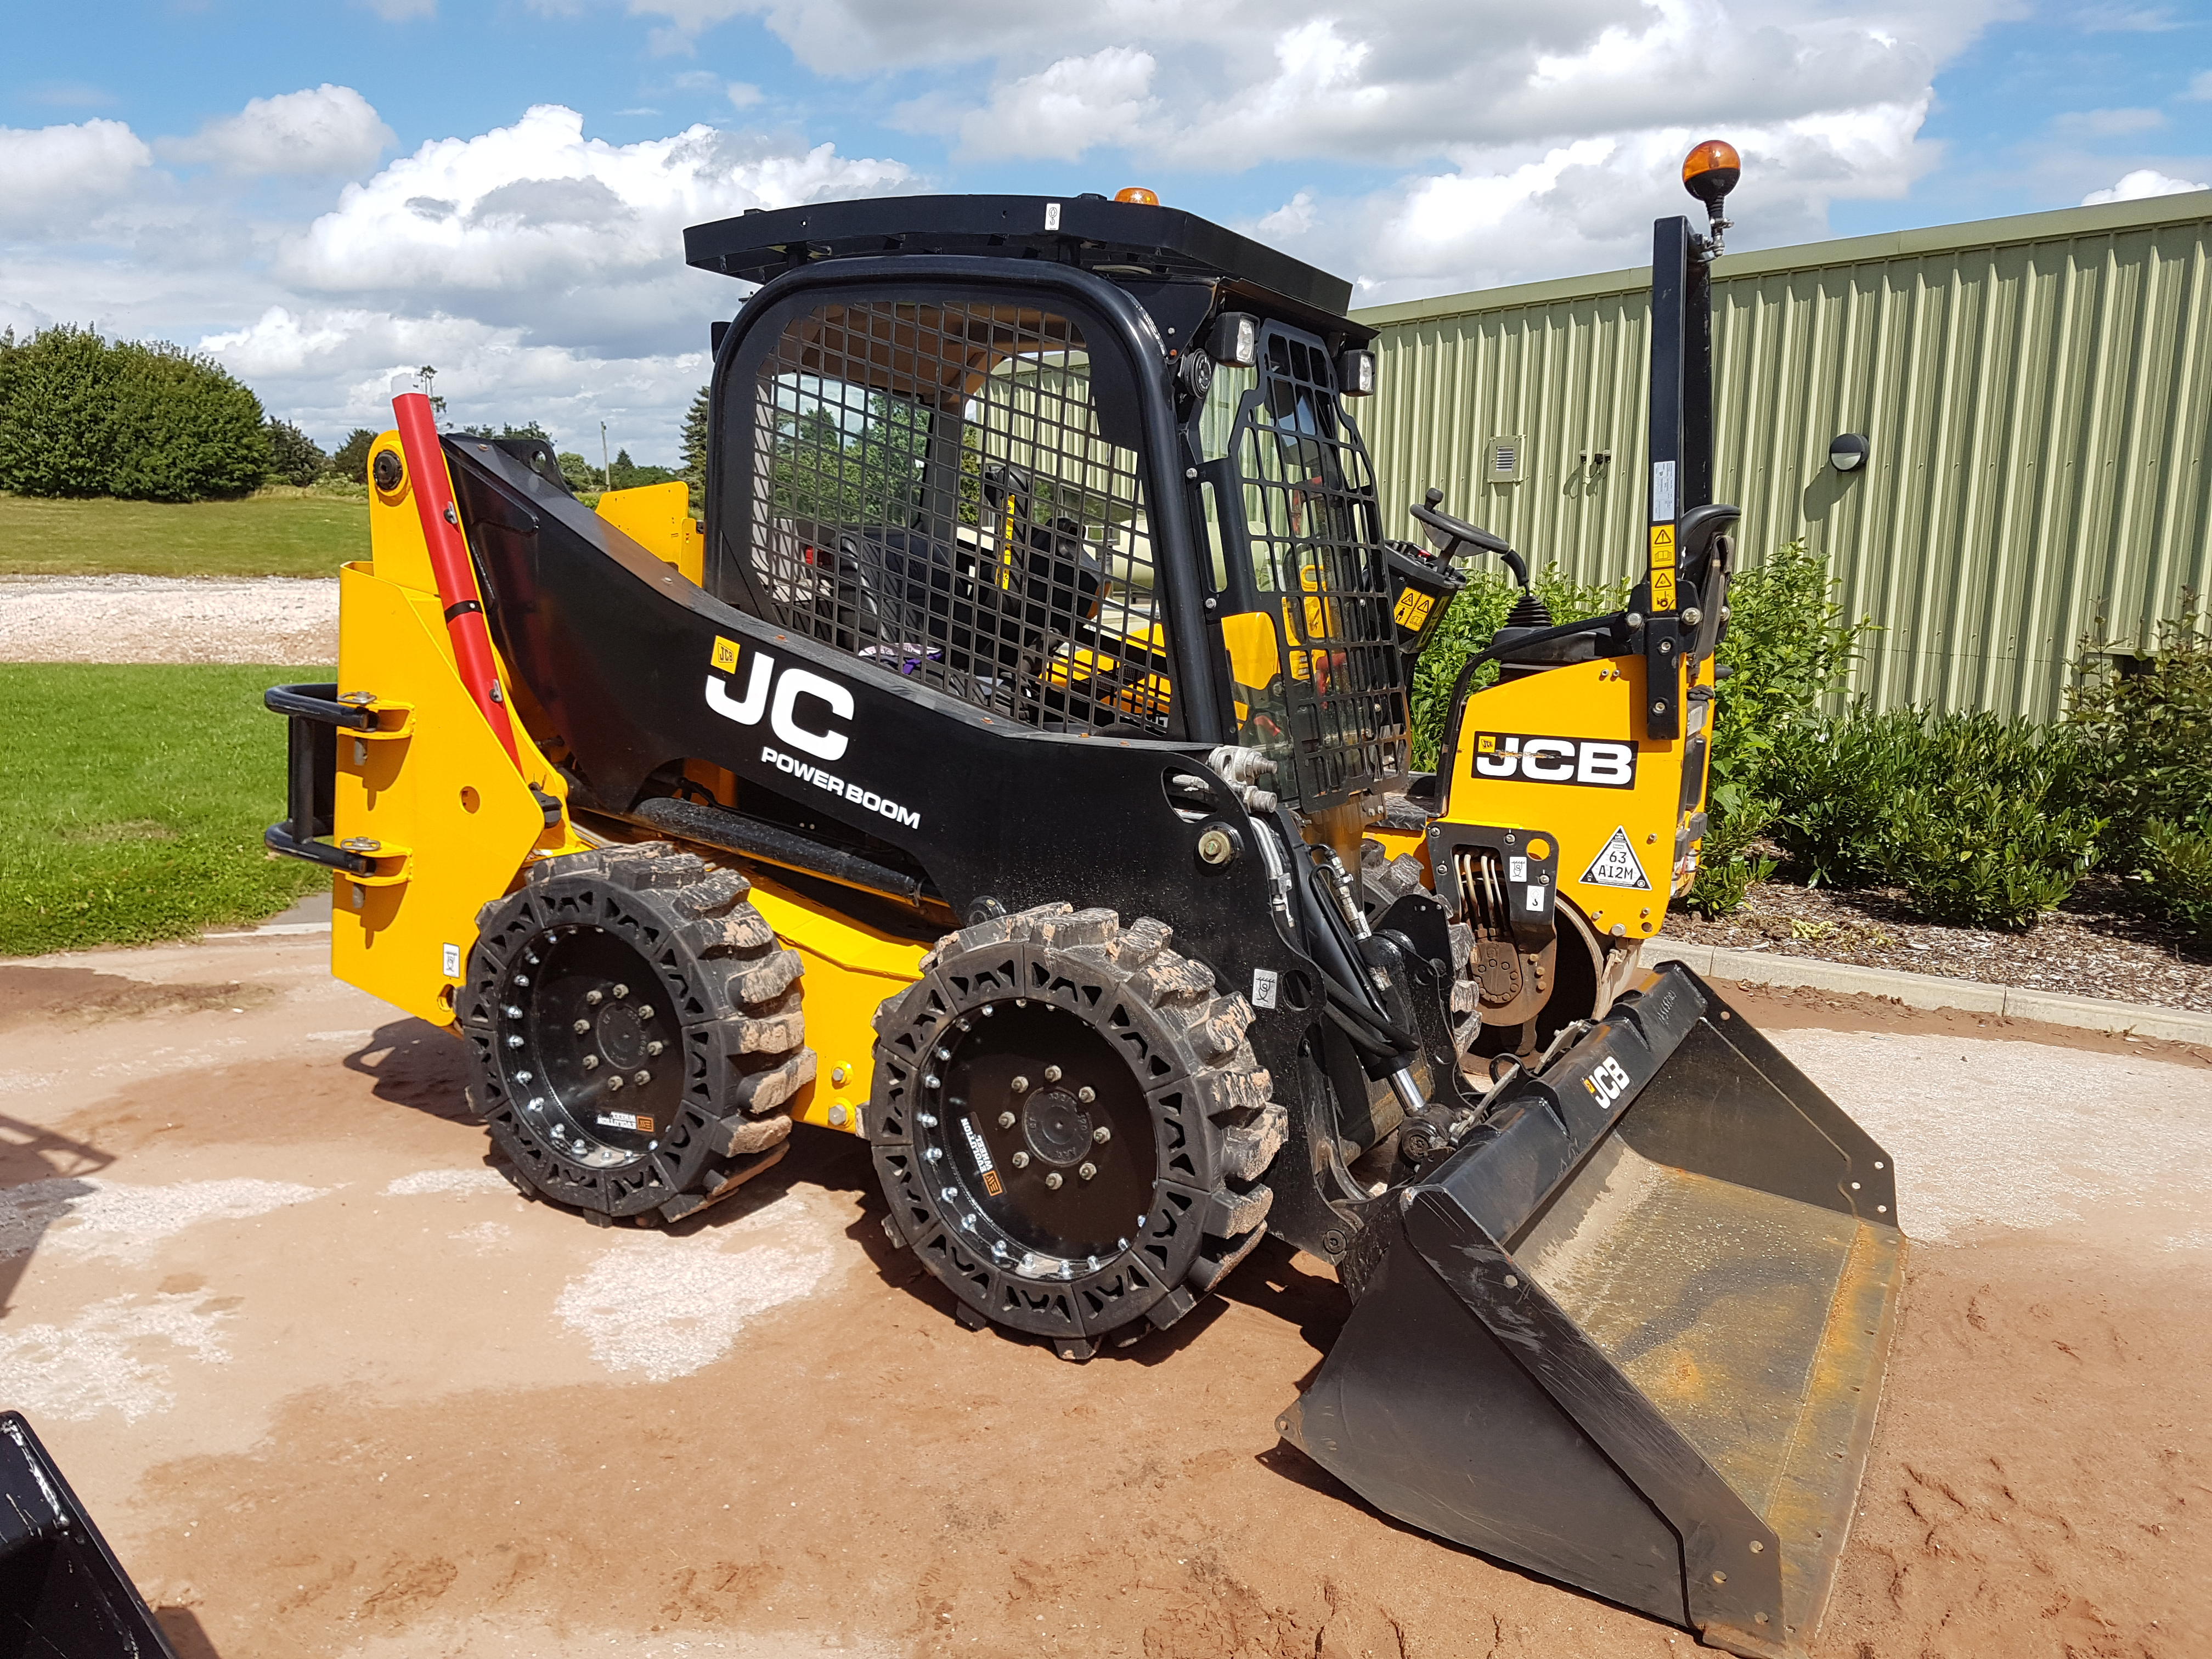 This images shows a yellow JCB Skid Steer using our Bobcat solid tires.